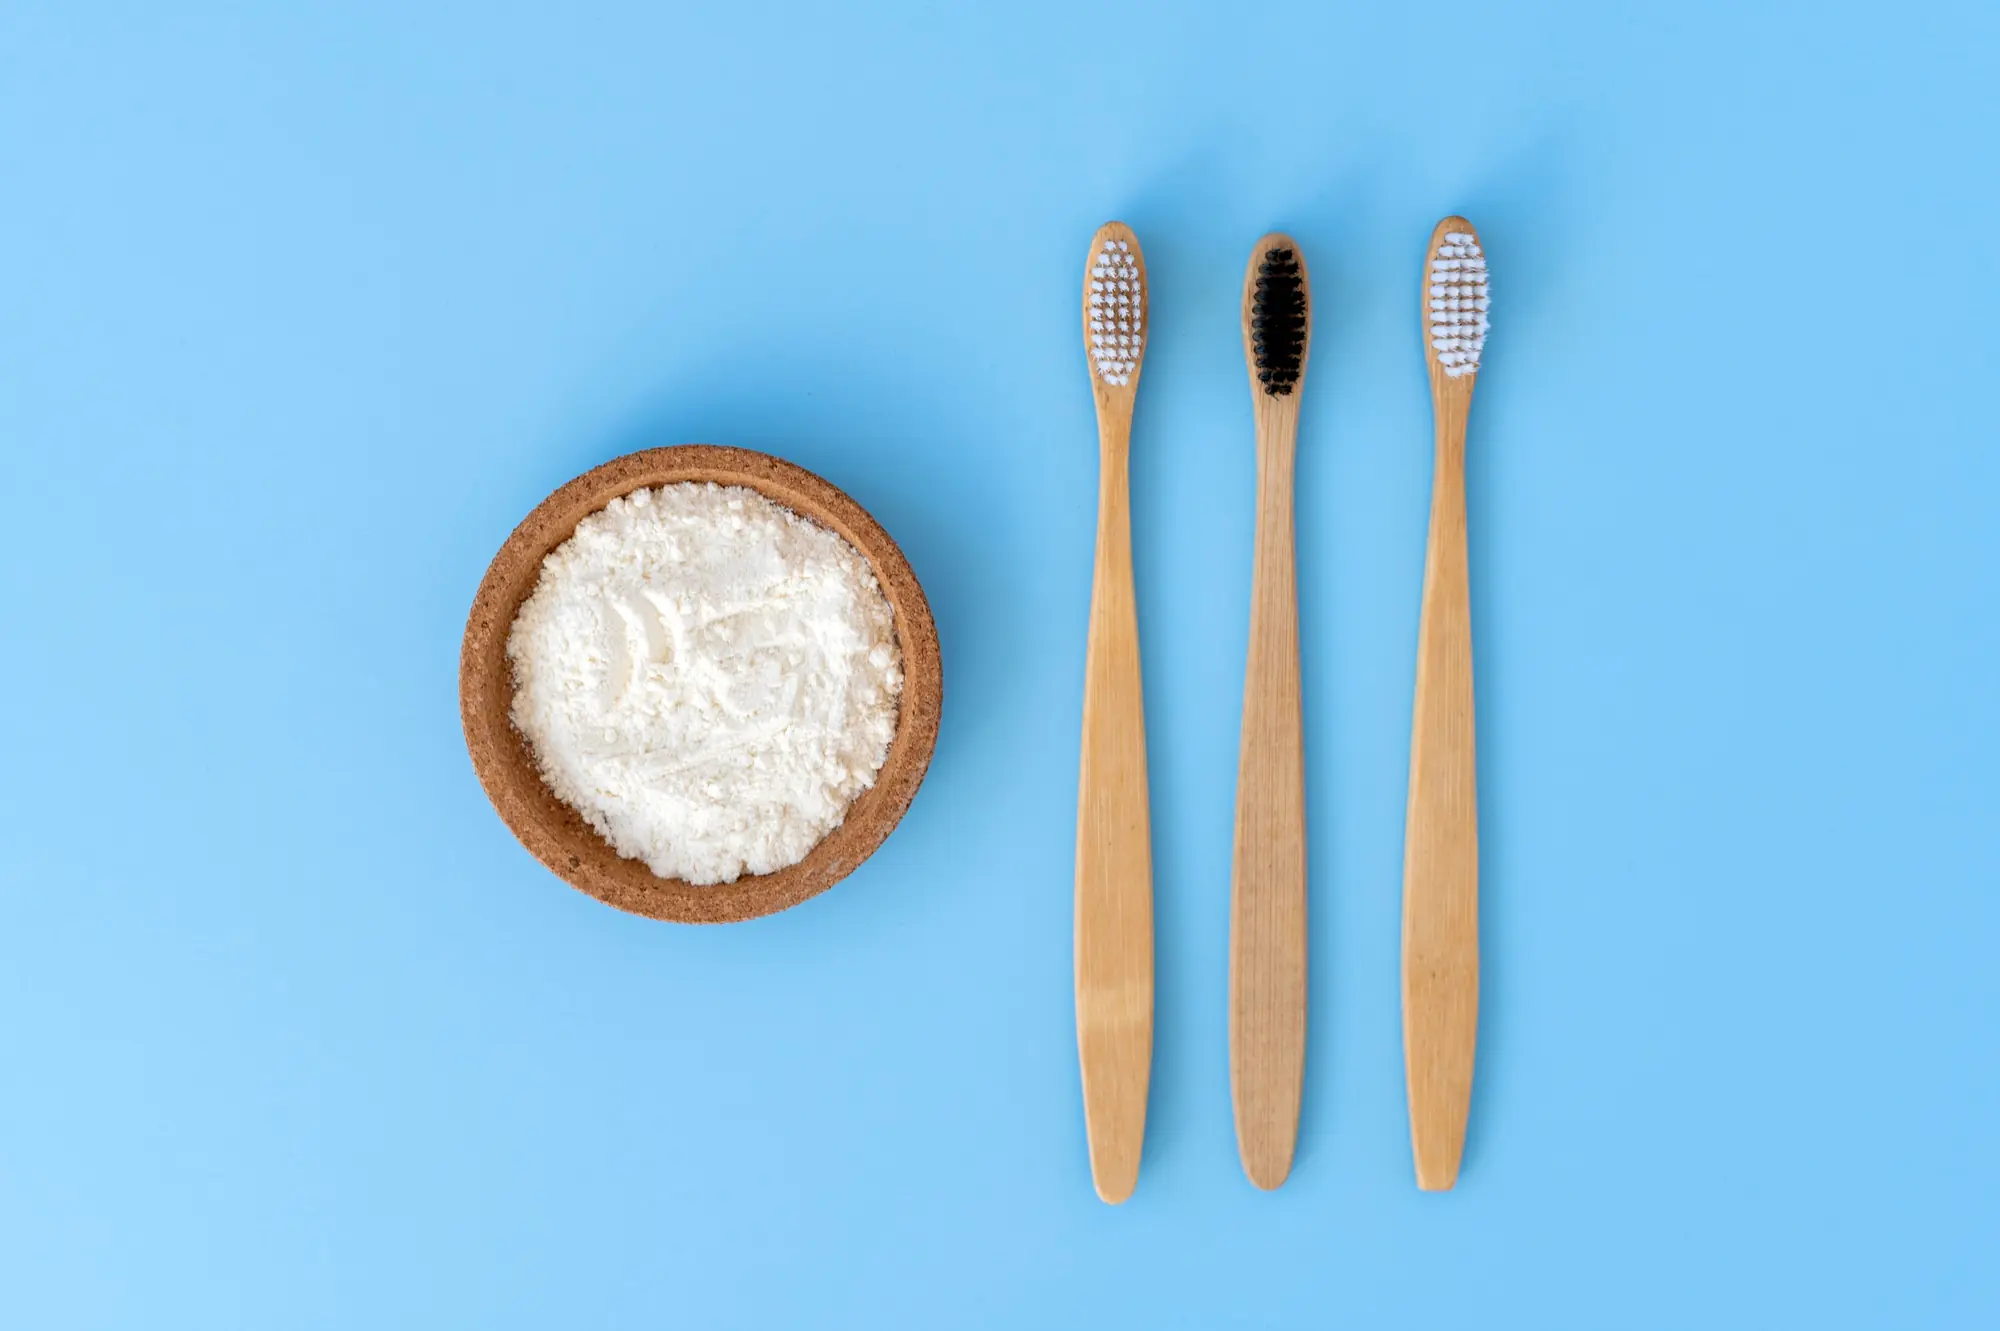 Two bamboo toothbrushes next to a small bowl of baking soda on a blue background.